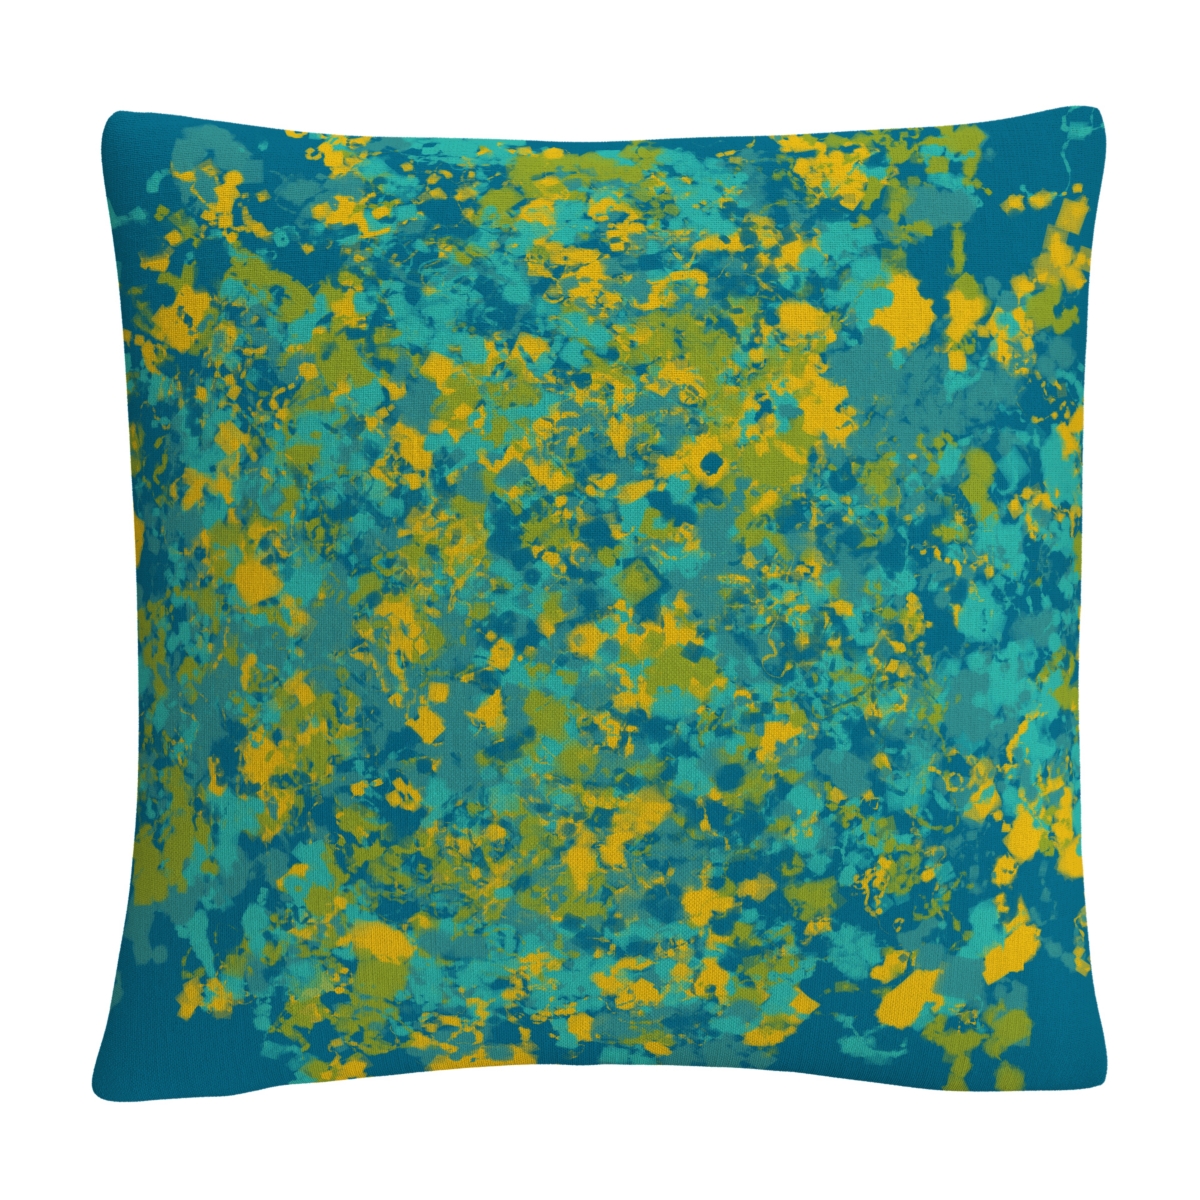 Abc Speckled Colorful Splatter Abstract 2Decorative Pillow, 16 x 16